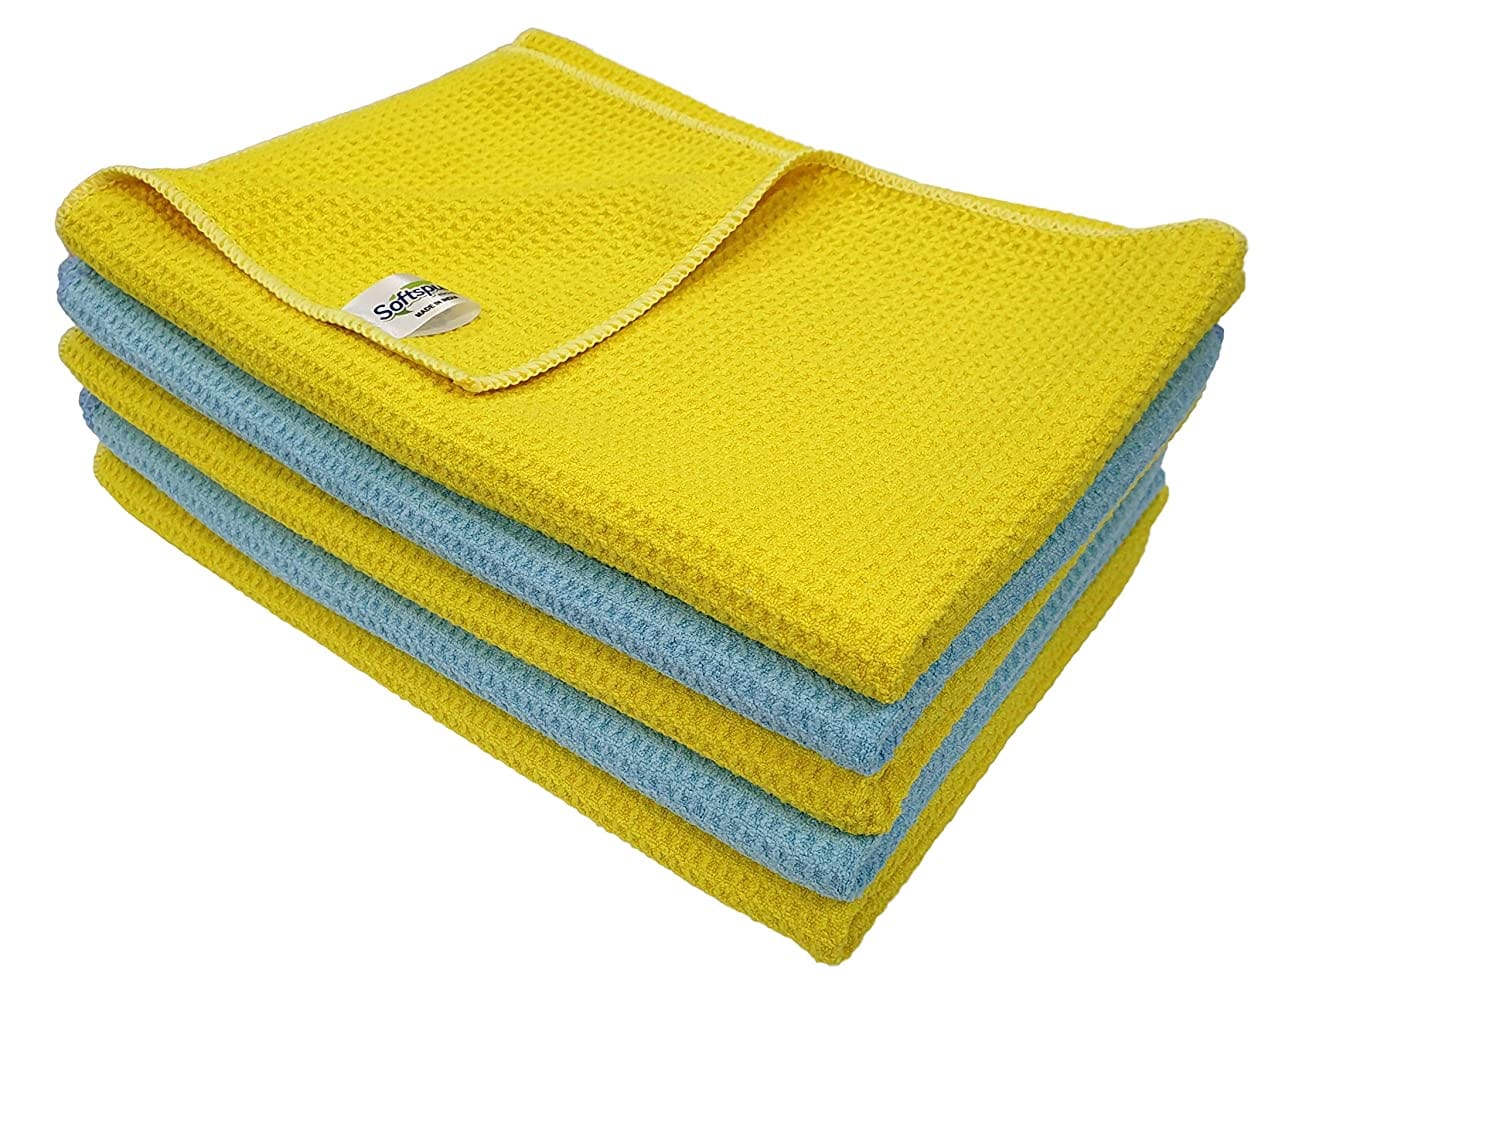 Softspun 400 GSM microfiber cloth is best for drying and best car polishing towel